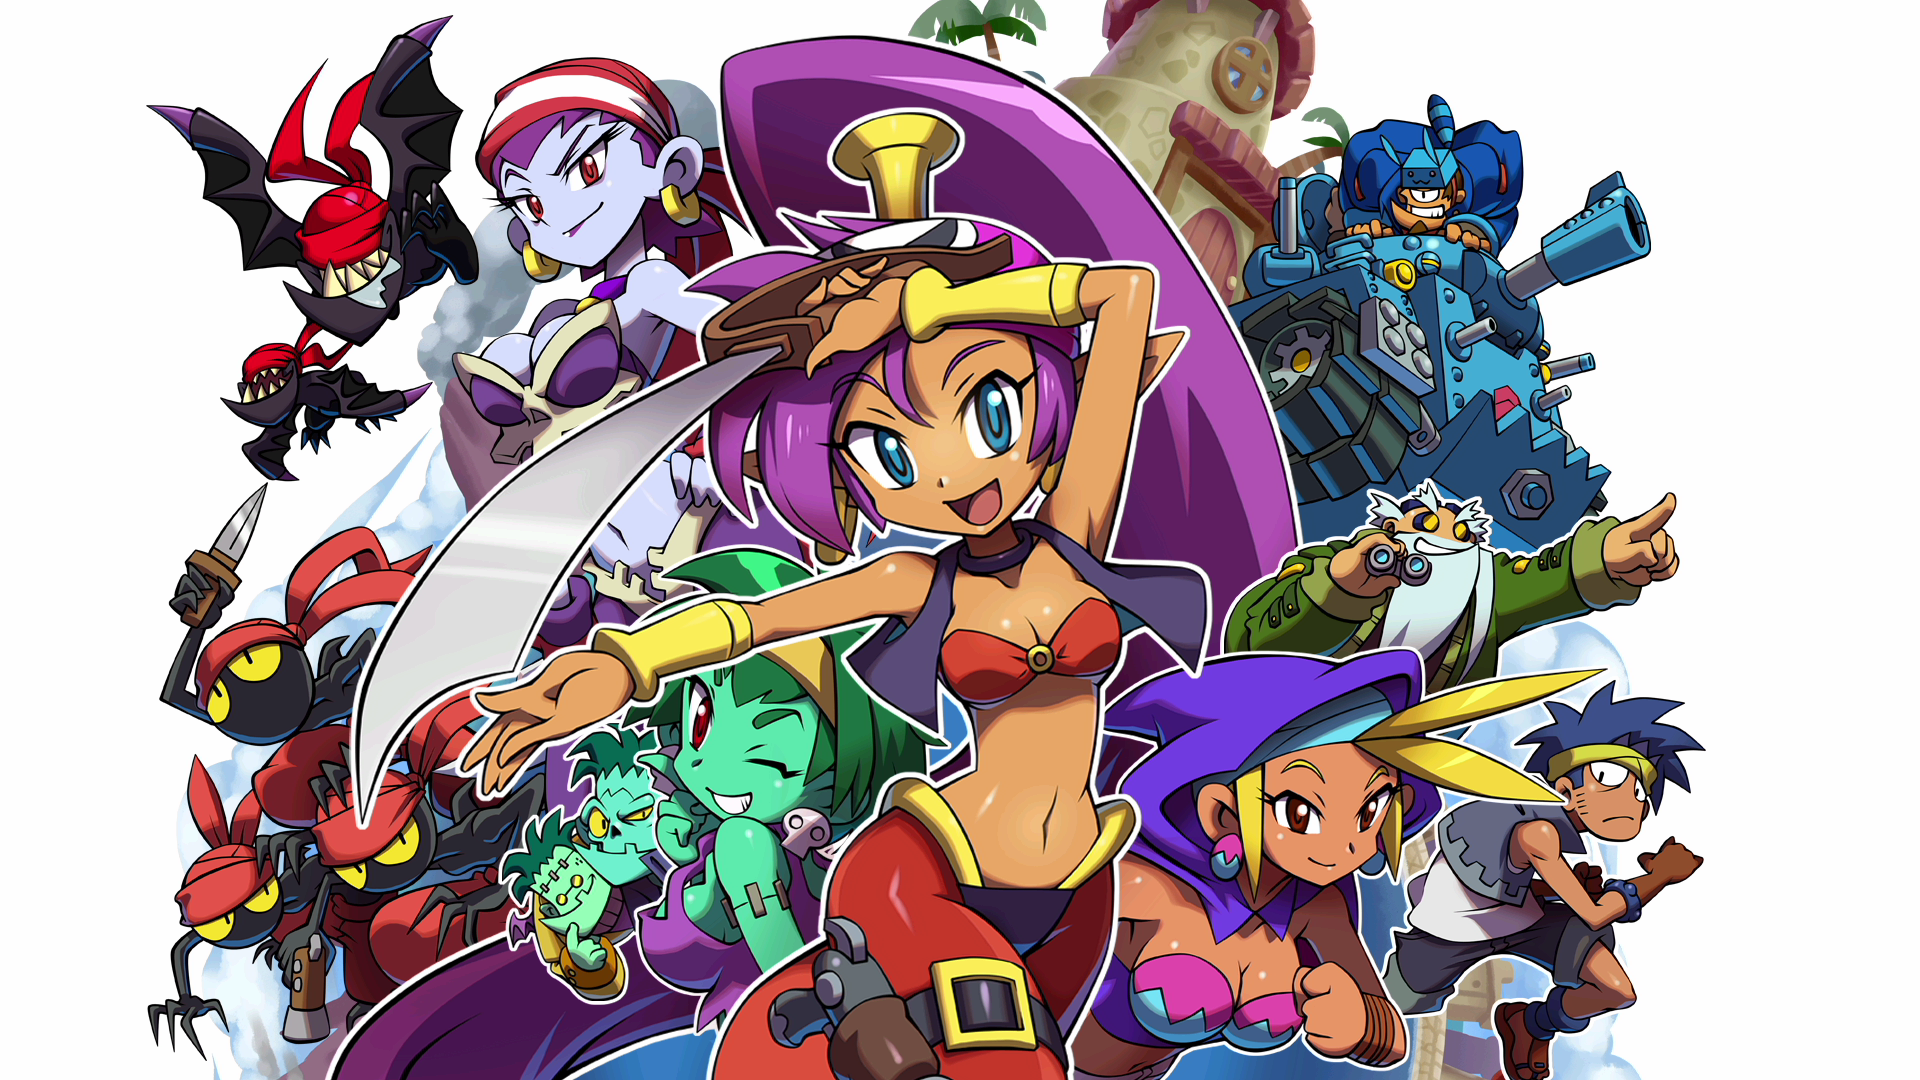 Shantae And The Pirate's Curse HD wallpapers, Desktop wallpaper - most viewed